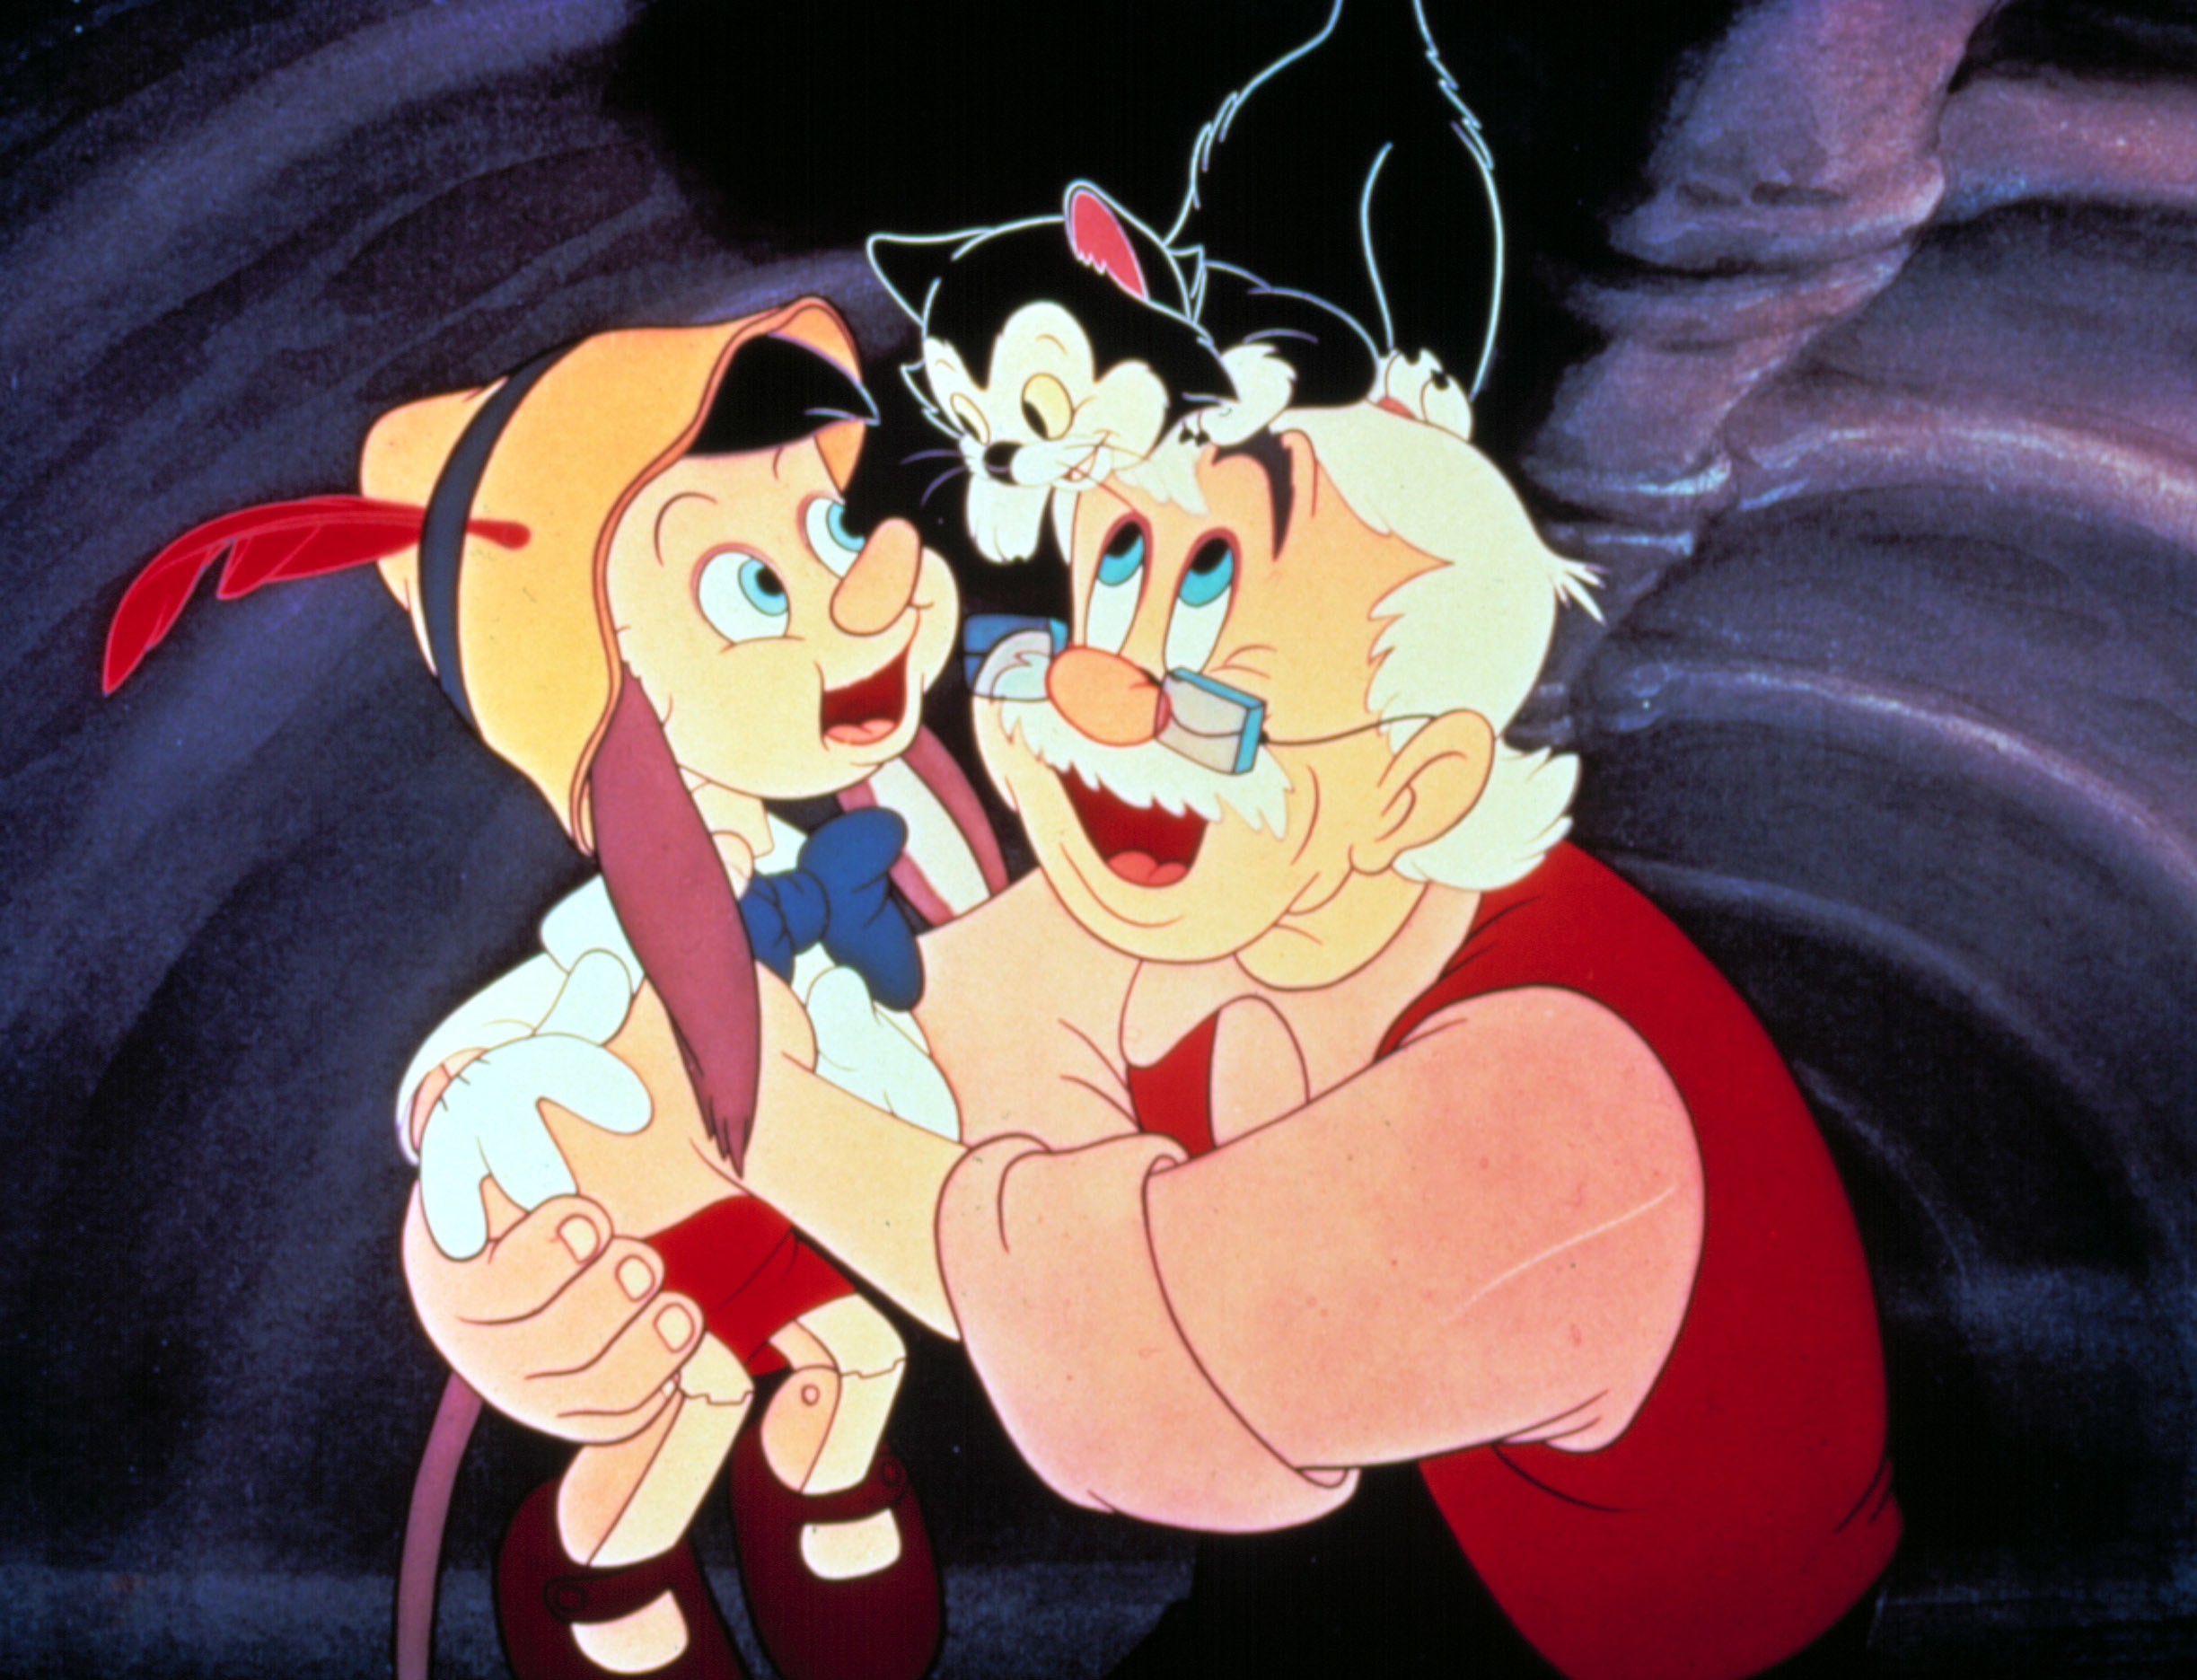 Pinocchio, Figaro and Geppetto in the animated version of Pinocchio